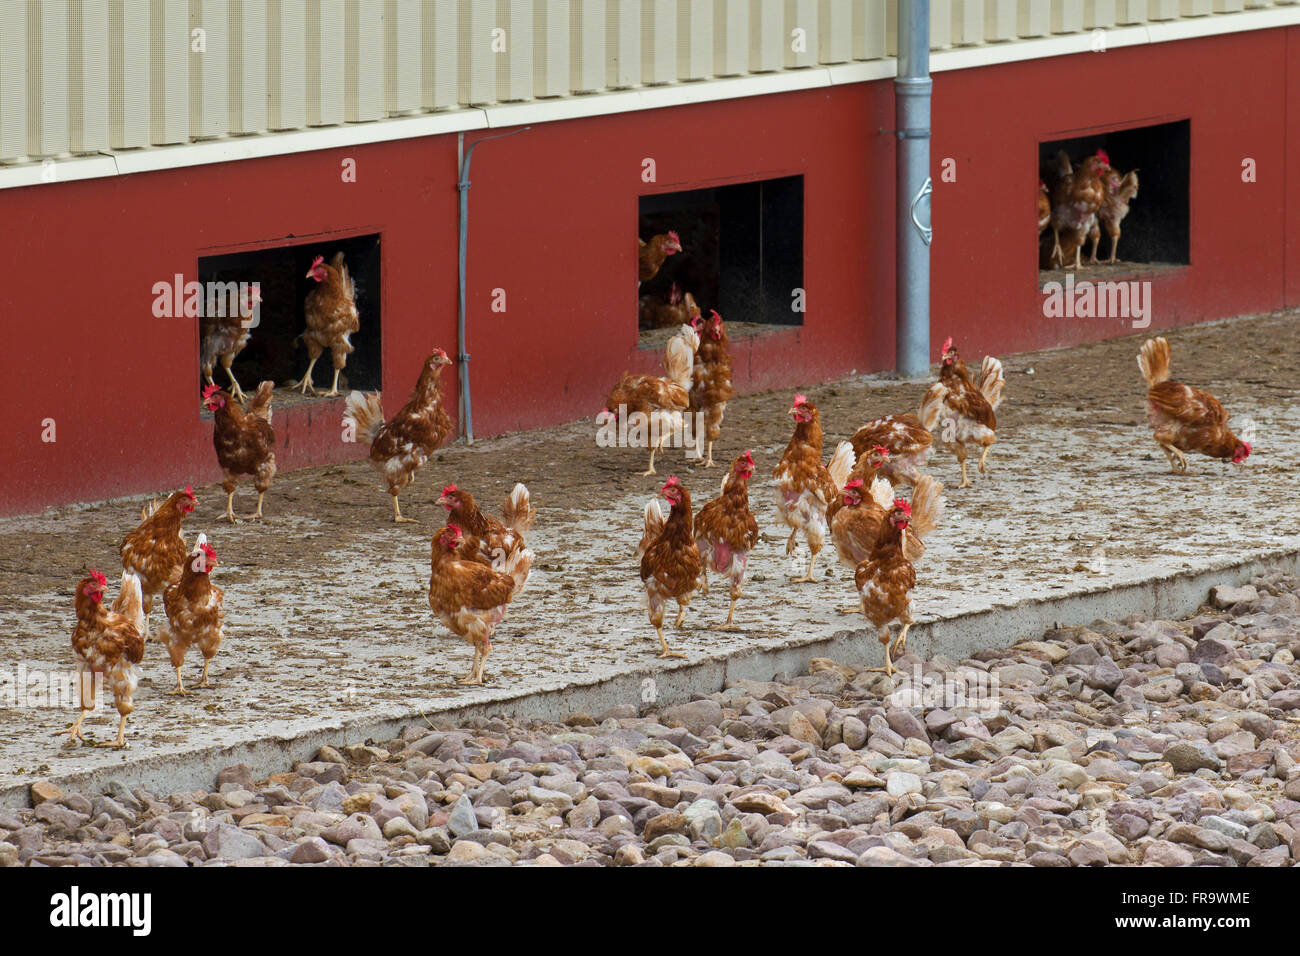 Domestic chickens (Gallus gallus domesticus), commercial free range hens roam freely outdoors Stock Photo